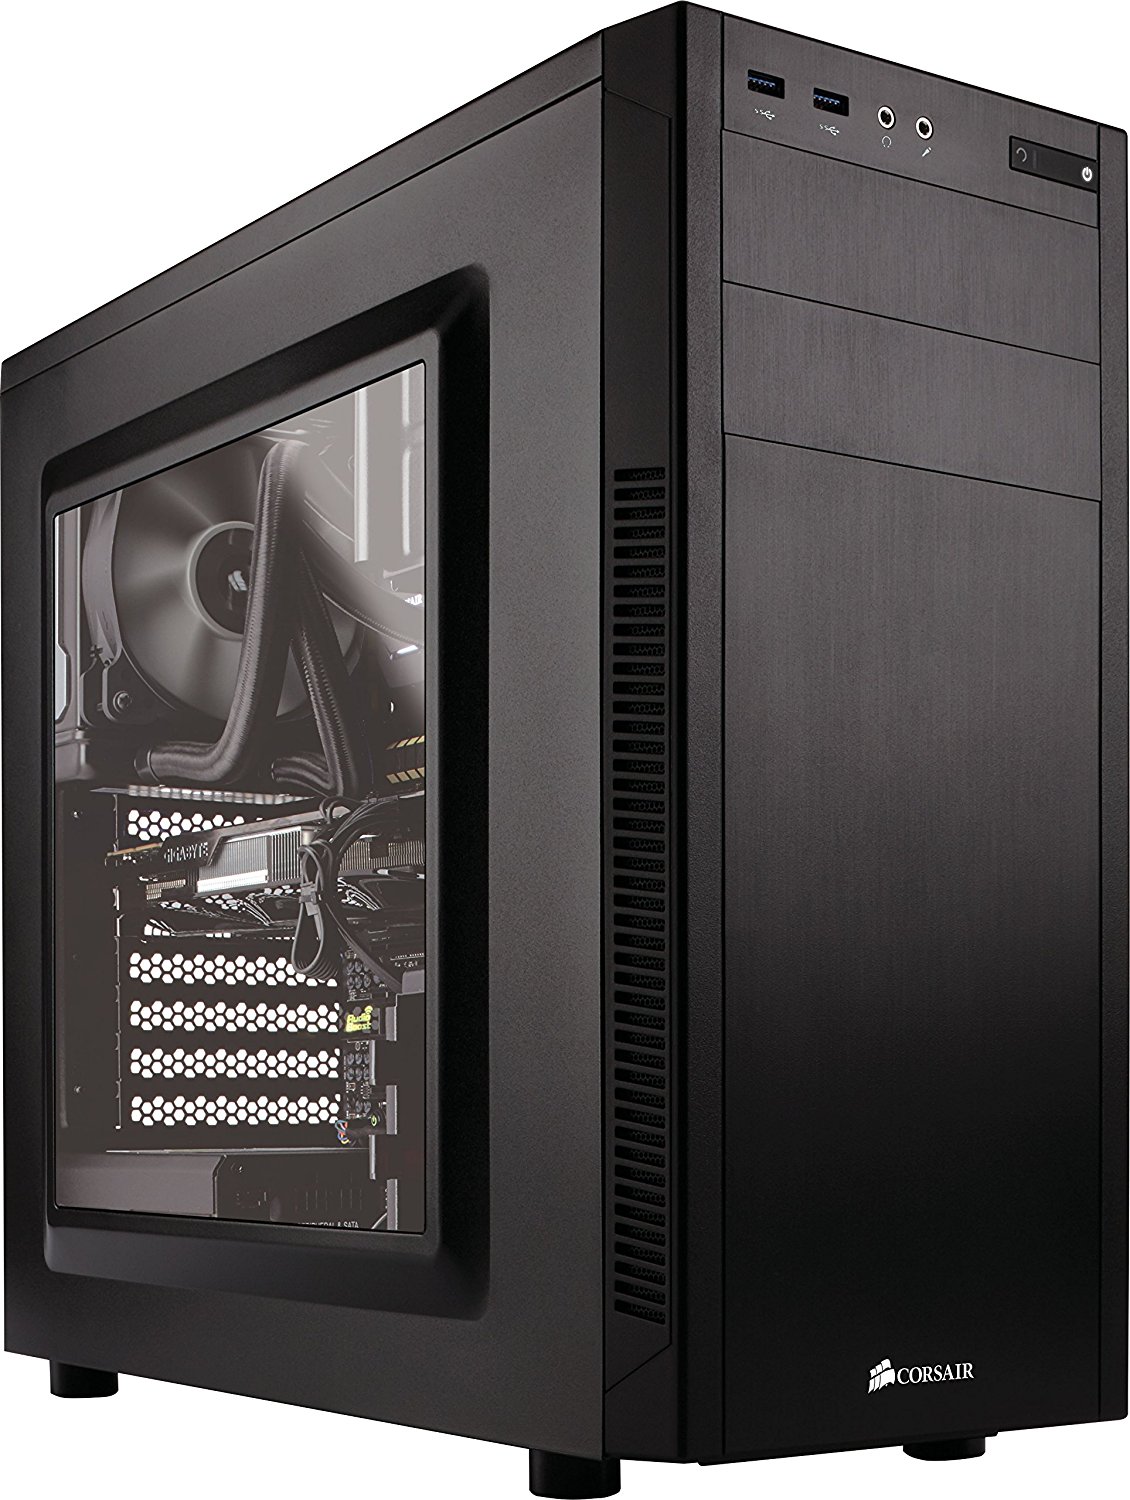 Corsair Carbide Series 100R CC-9011075-WW Black Steel ATX Mid Tower Computer Case ATX (not included) Power Supply